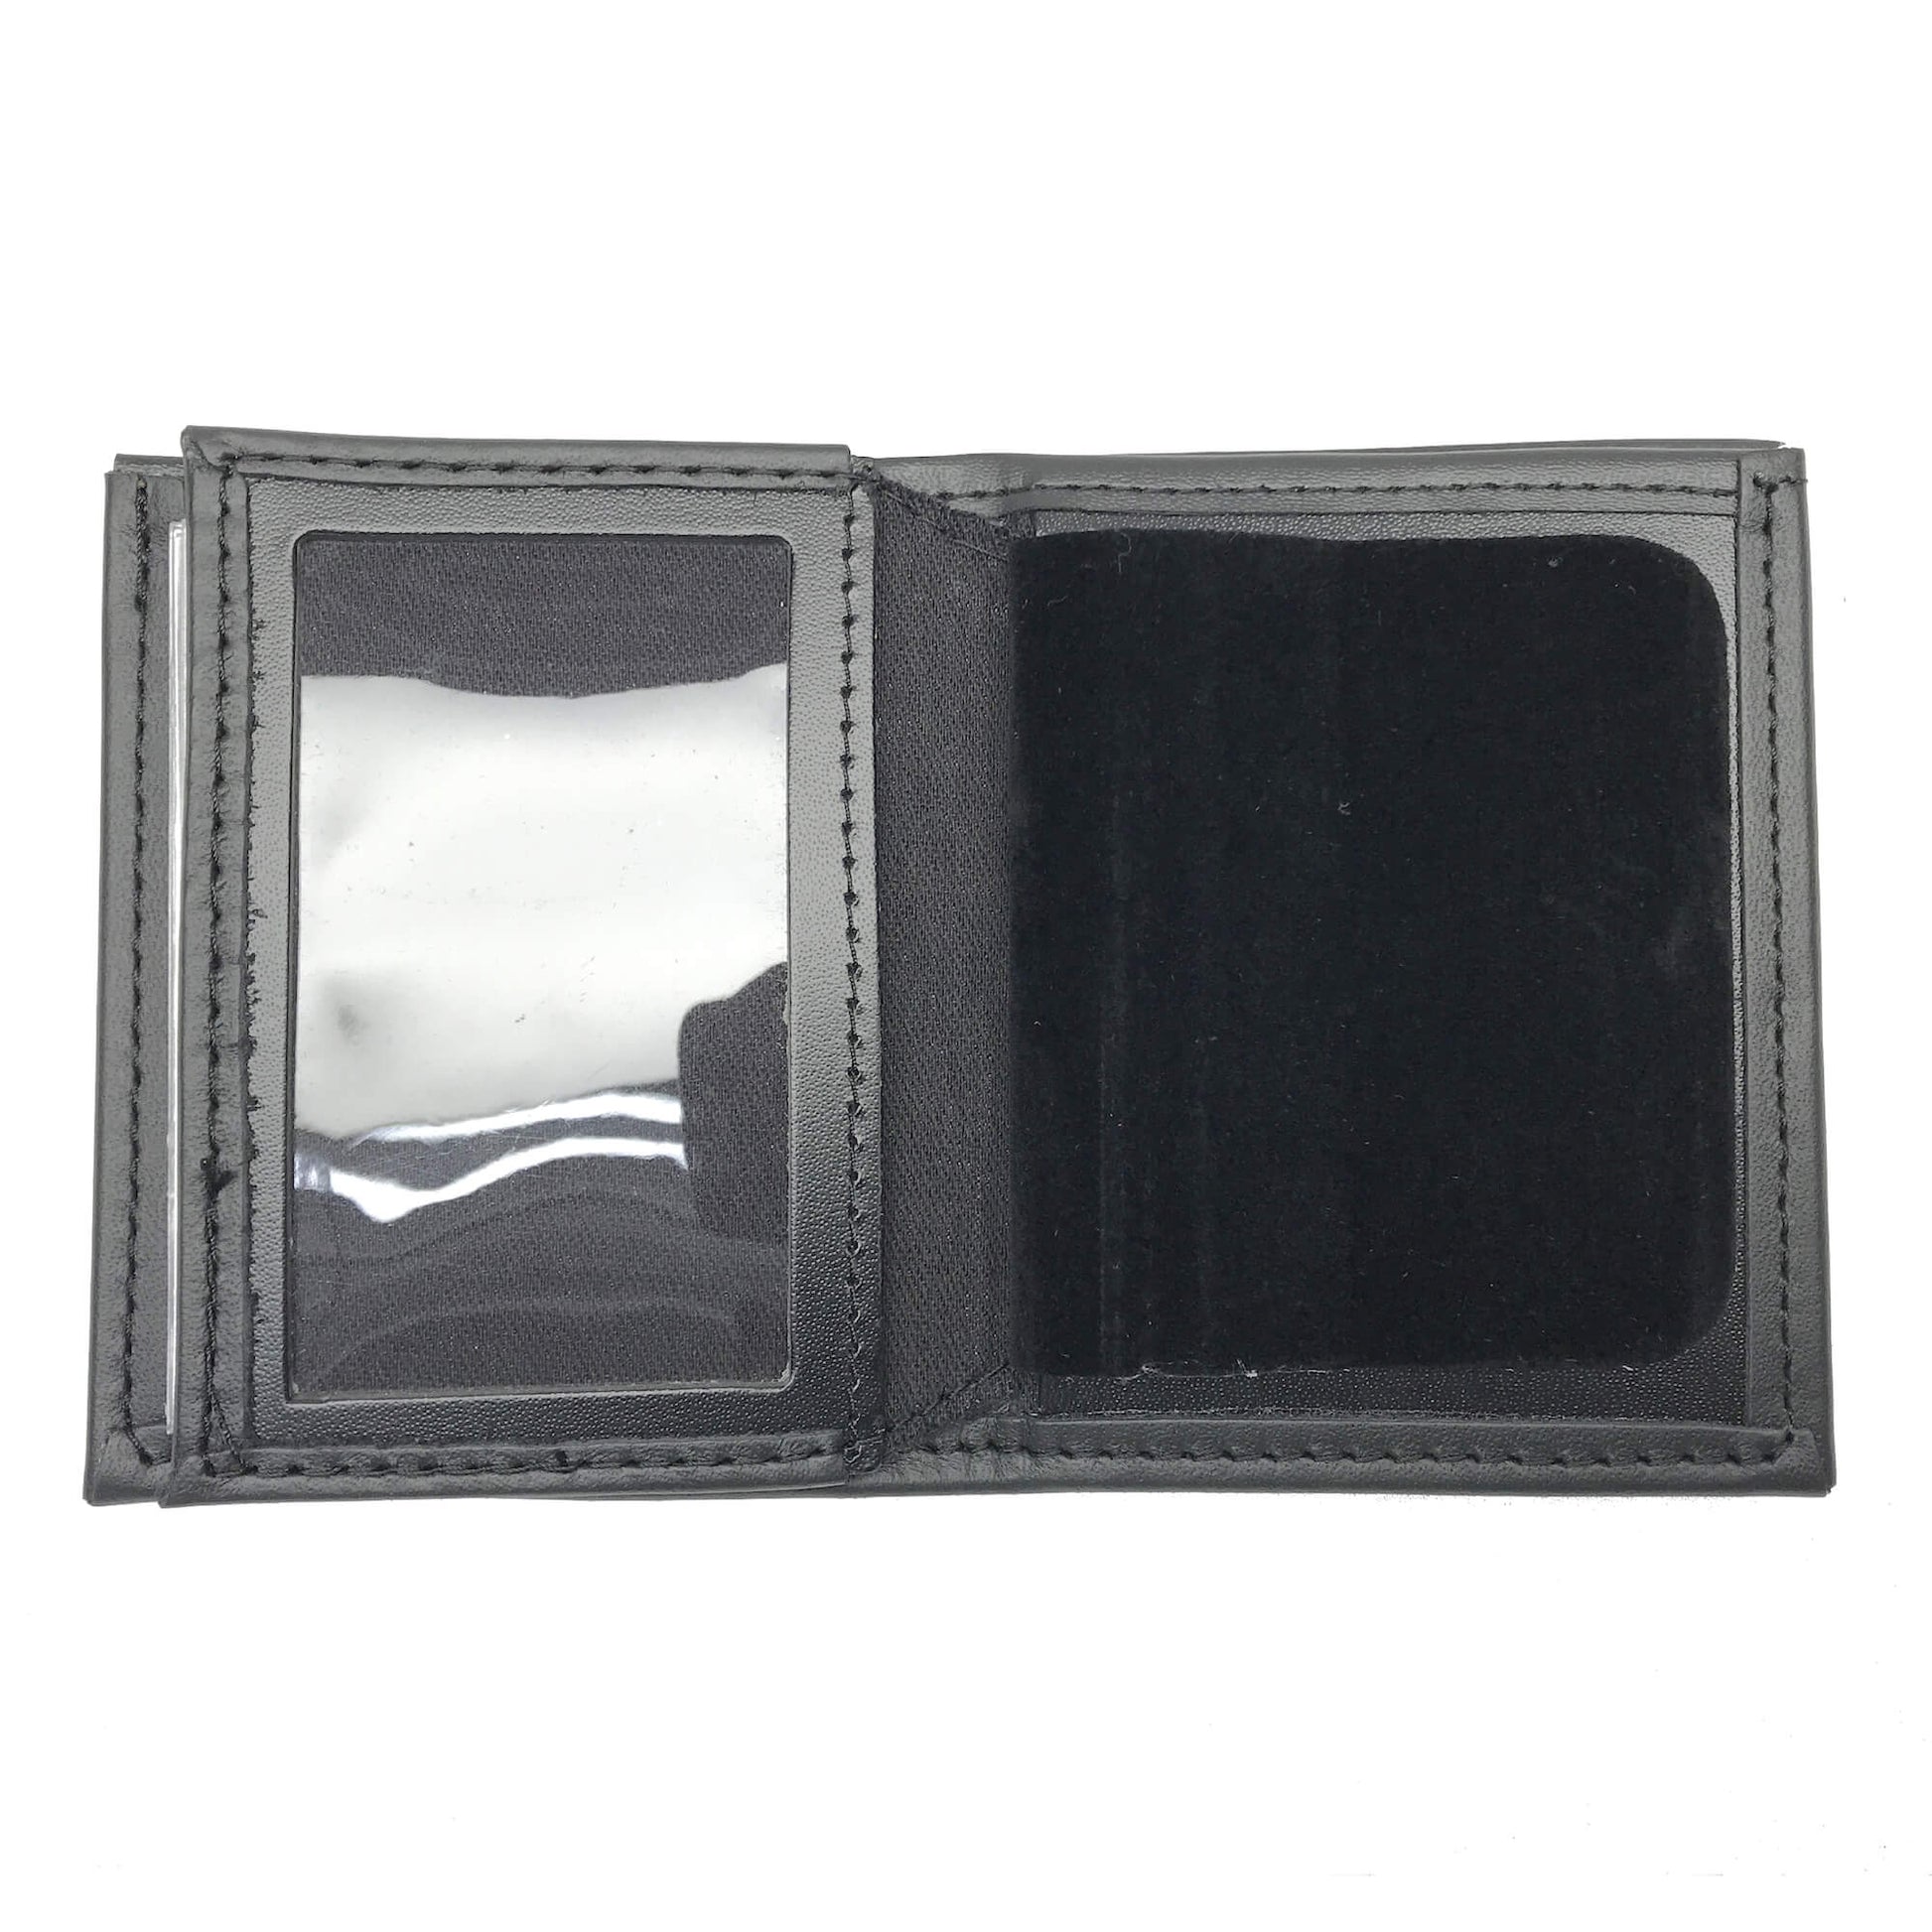 U.S. Immigration and Customs Enforcement - ICE (2.5in) Bifold Hidden Badge Wallet-Perfect Fit-911 Duty Gear USA